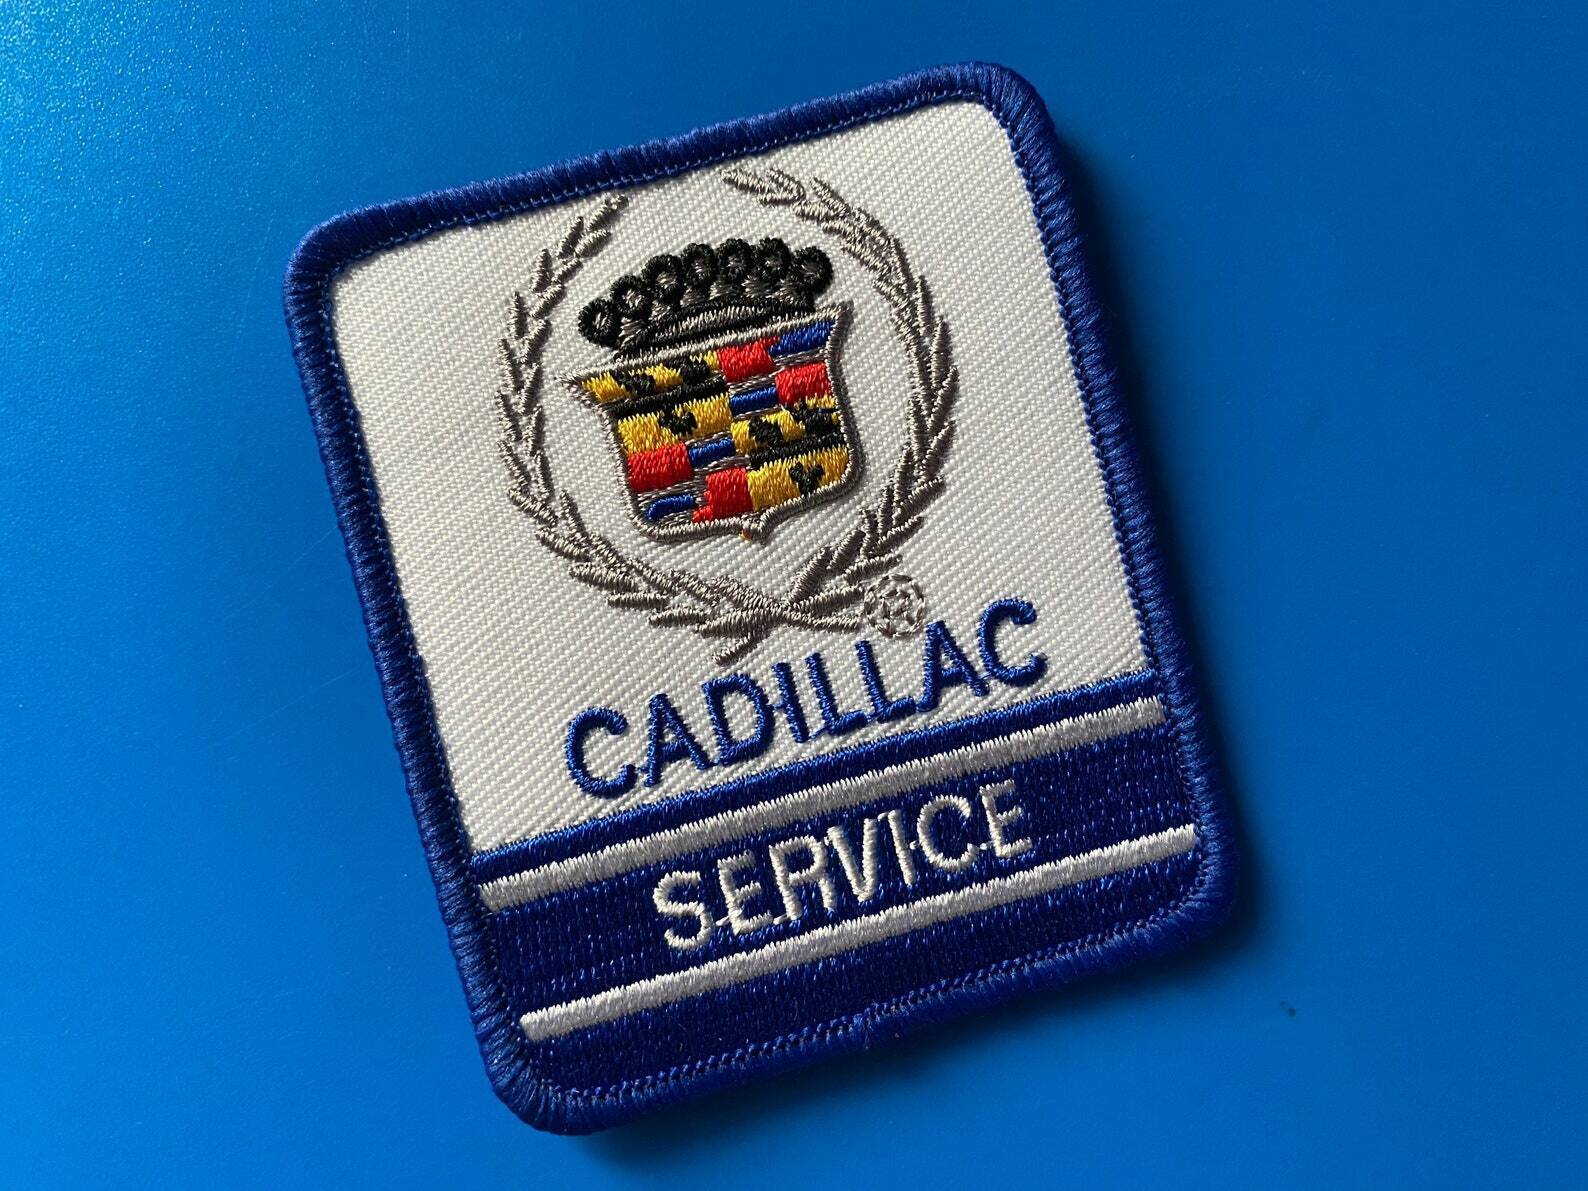 Cadillac Service Throwback Embroidered Iron On Patch 3” x 2.5”